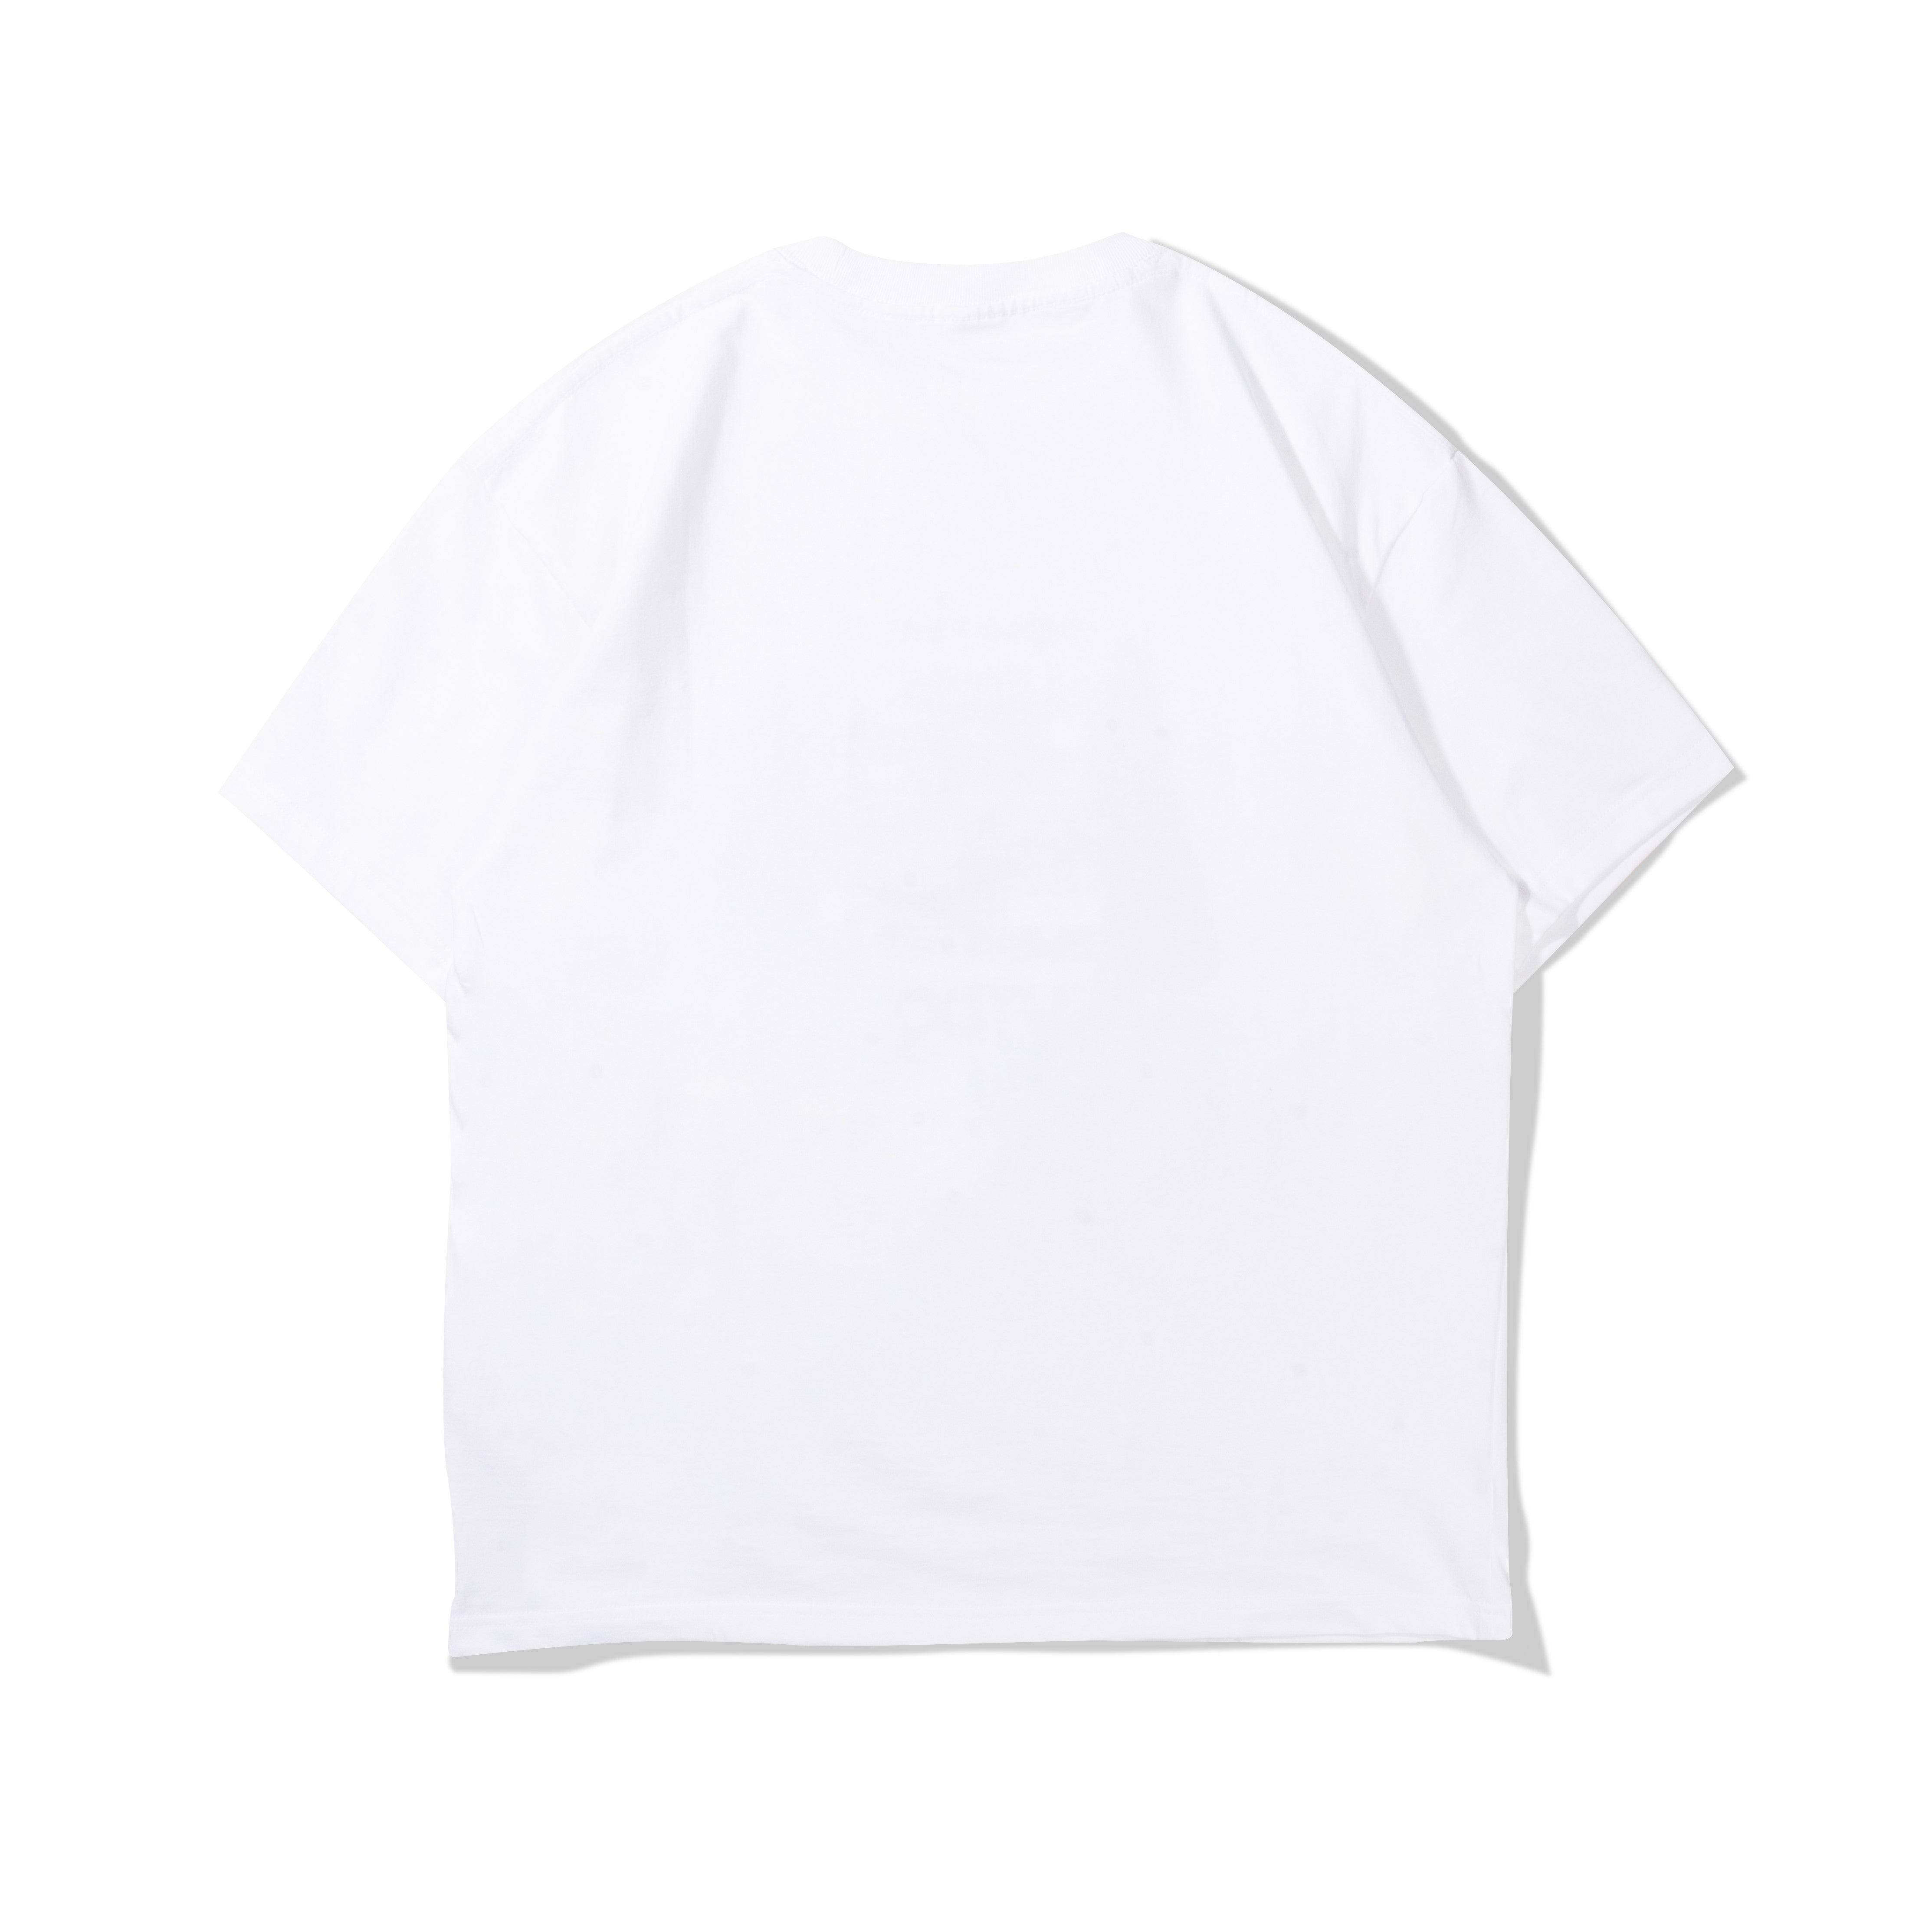 OUTDOOR PRODUCTS CITY ESCAPE TSHIRT